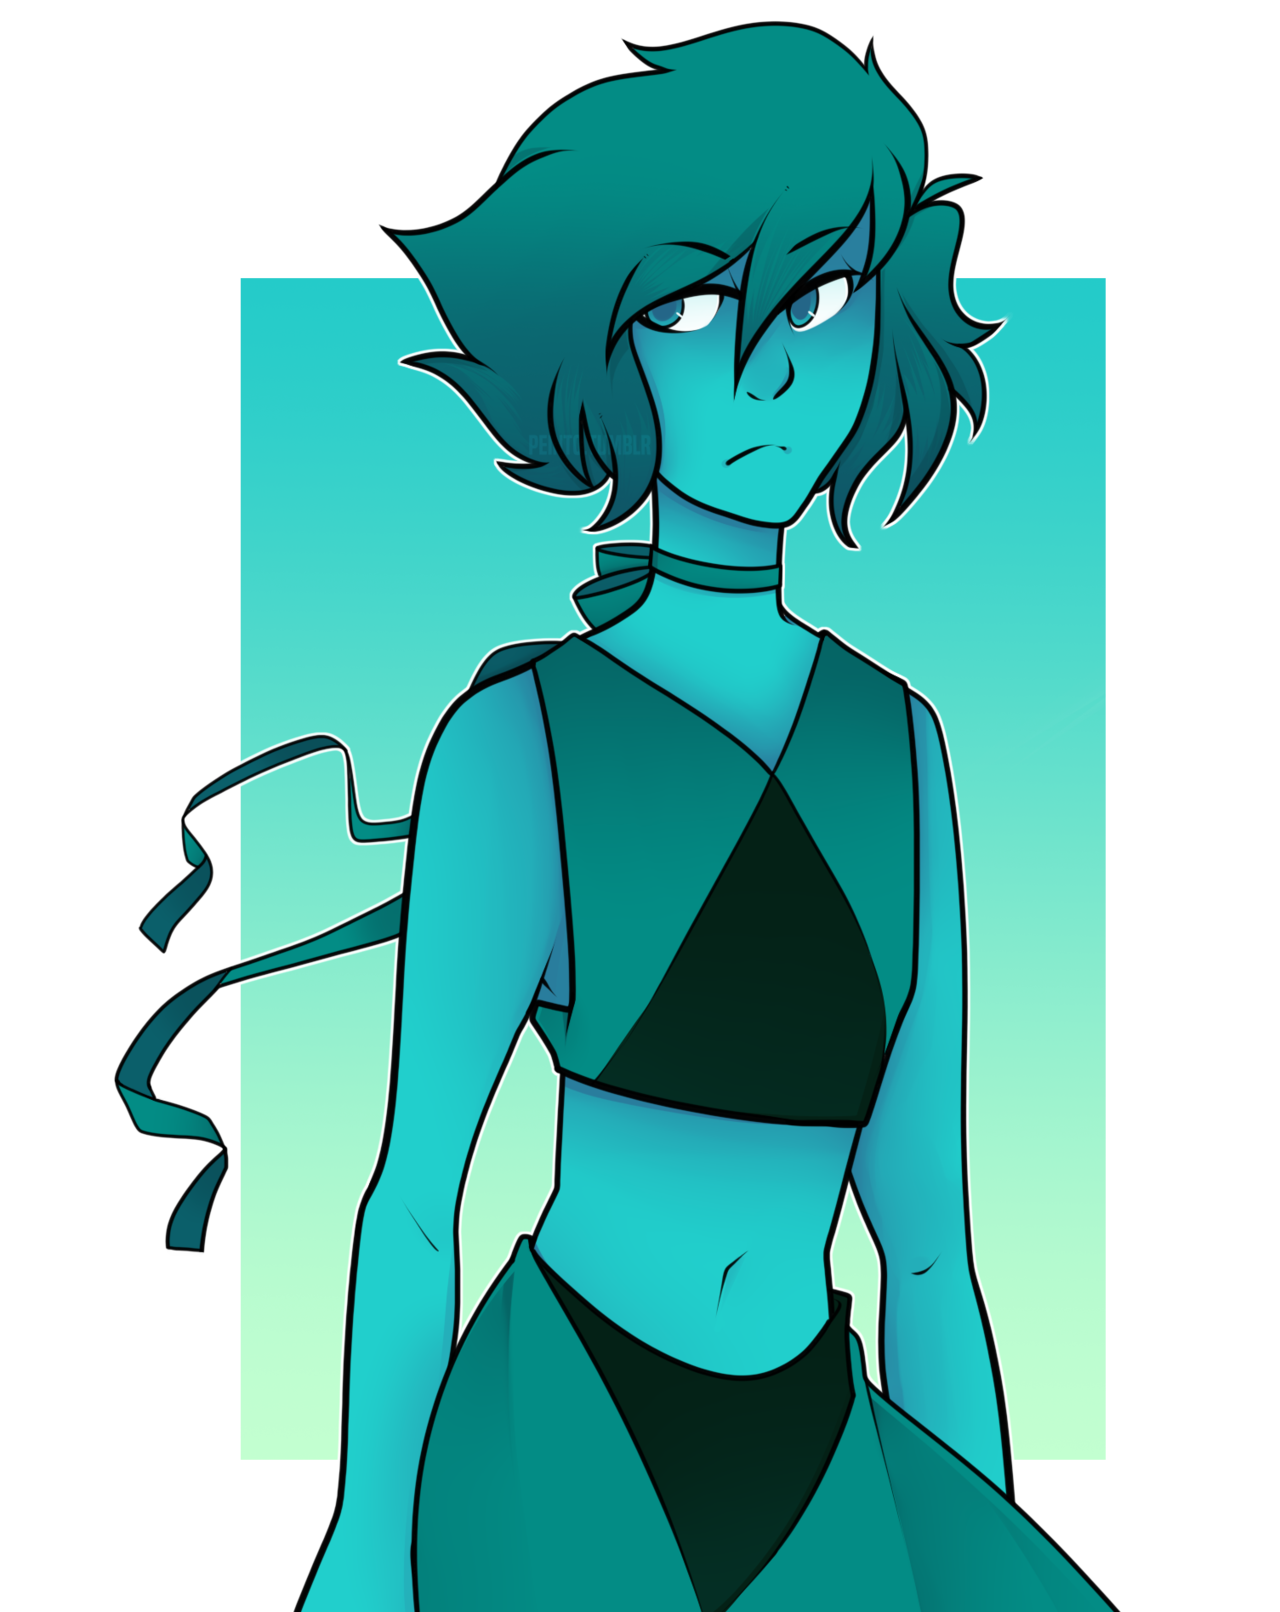 Haven’t done an illustration of Lapis in a long time, so have a quickie!